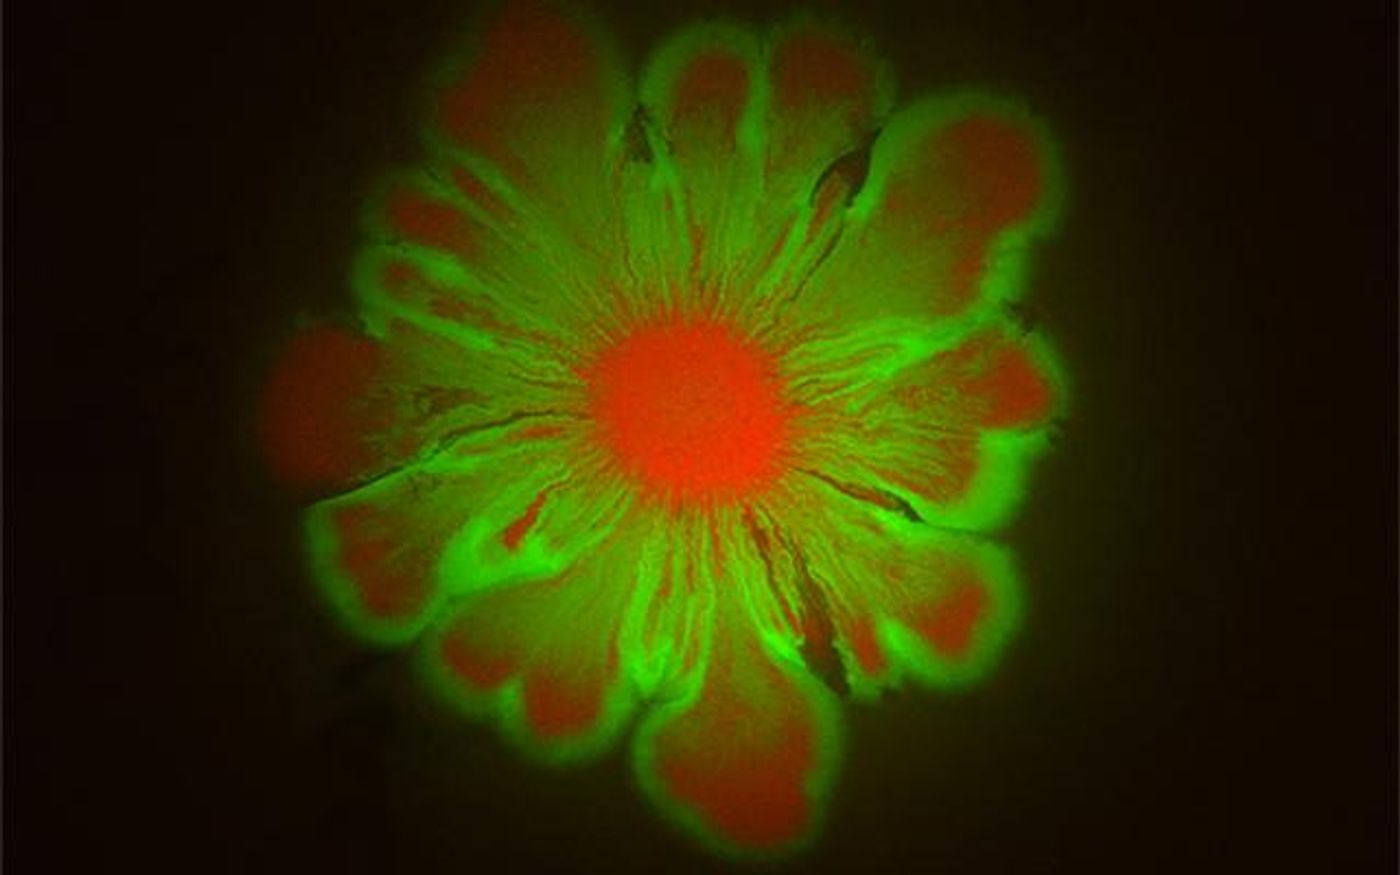 E. coli and A. baylyi form intricate flower-like patterns when grown together over a 24-hr. period. / Credit: BioCircuits Institute/UC San Diego